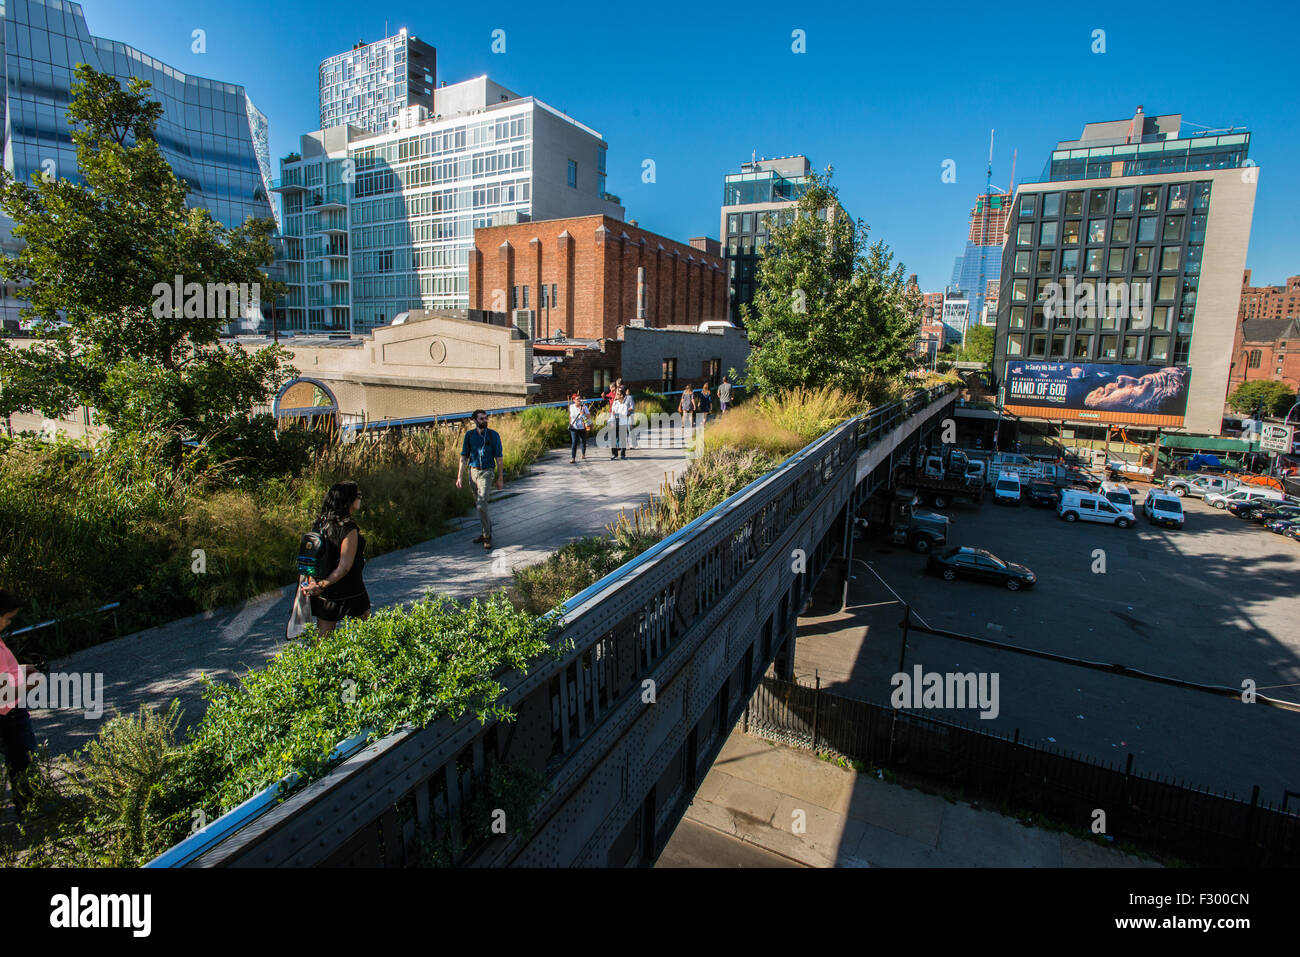 The urban elevated linear public park known as the High Line built on a disused elevated railway line September 15, 2015 in New York City. Stock Photo